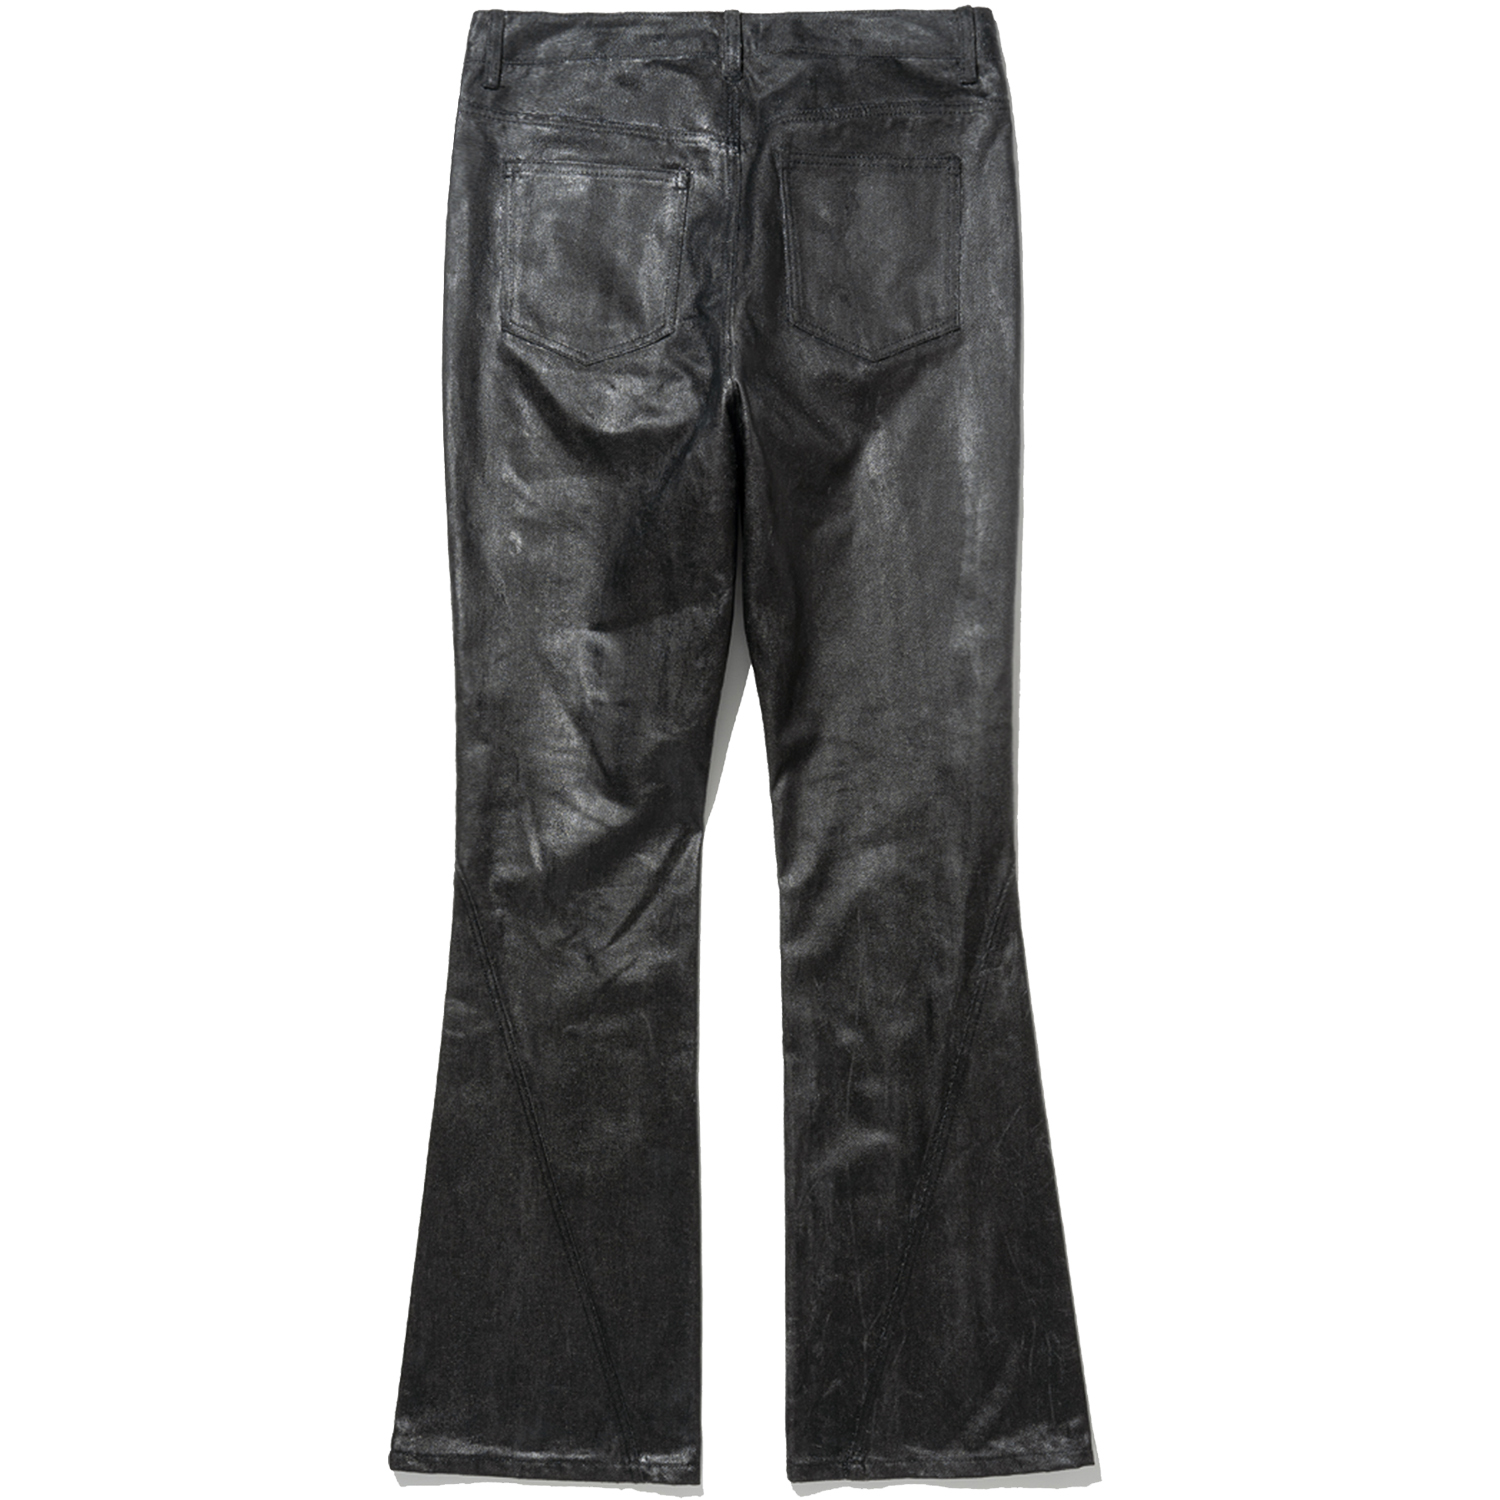 Curved Dirty Wash Bootscut Denim Pants - Coated Black,NOT4NERD